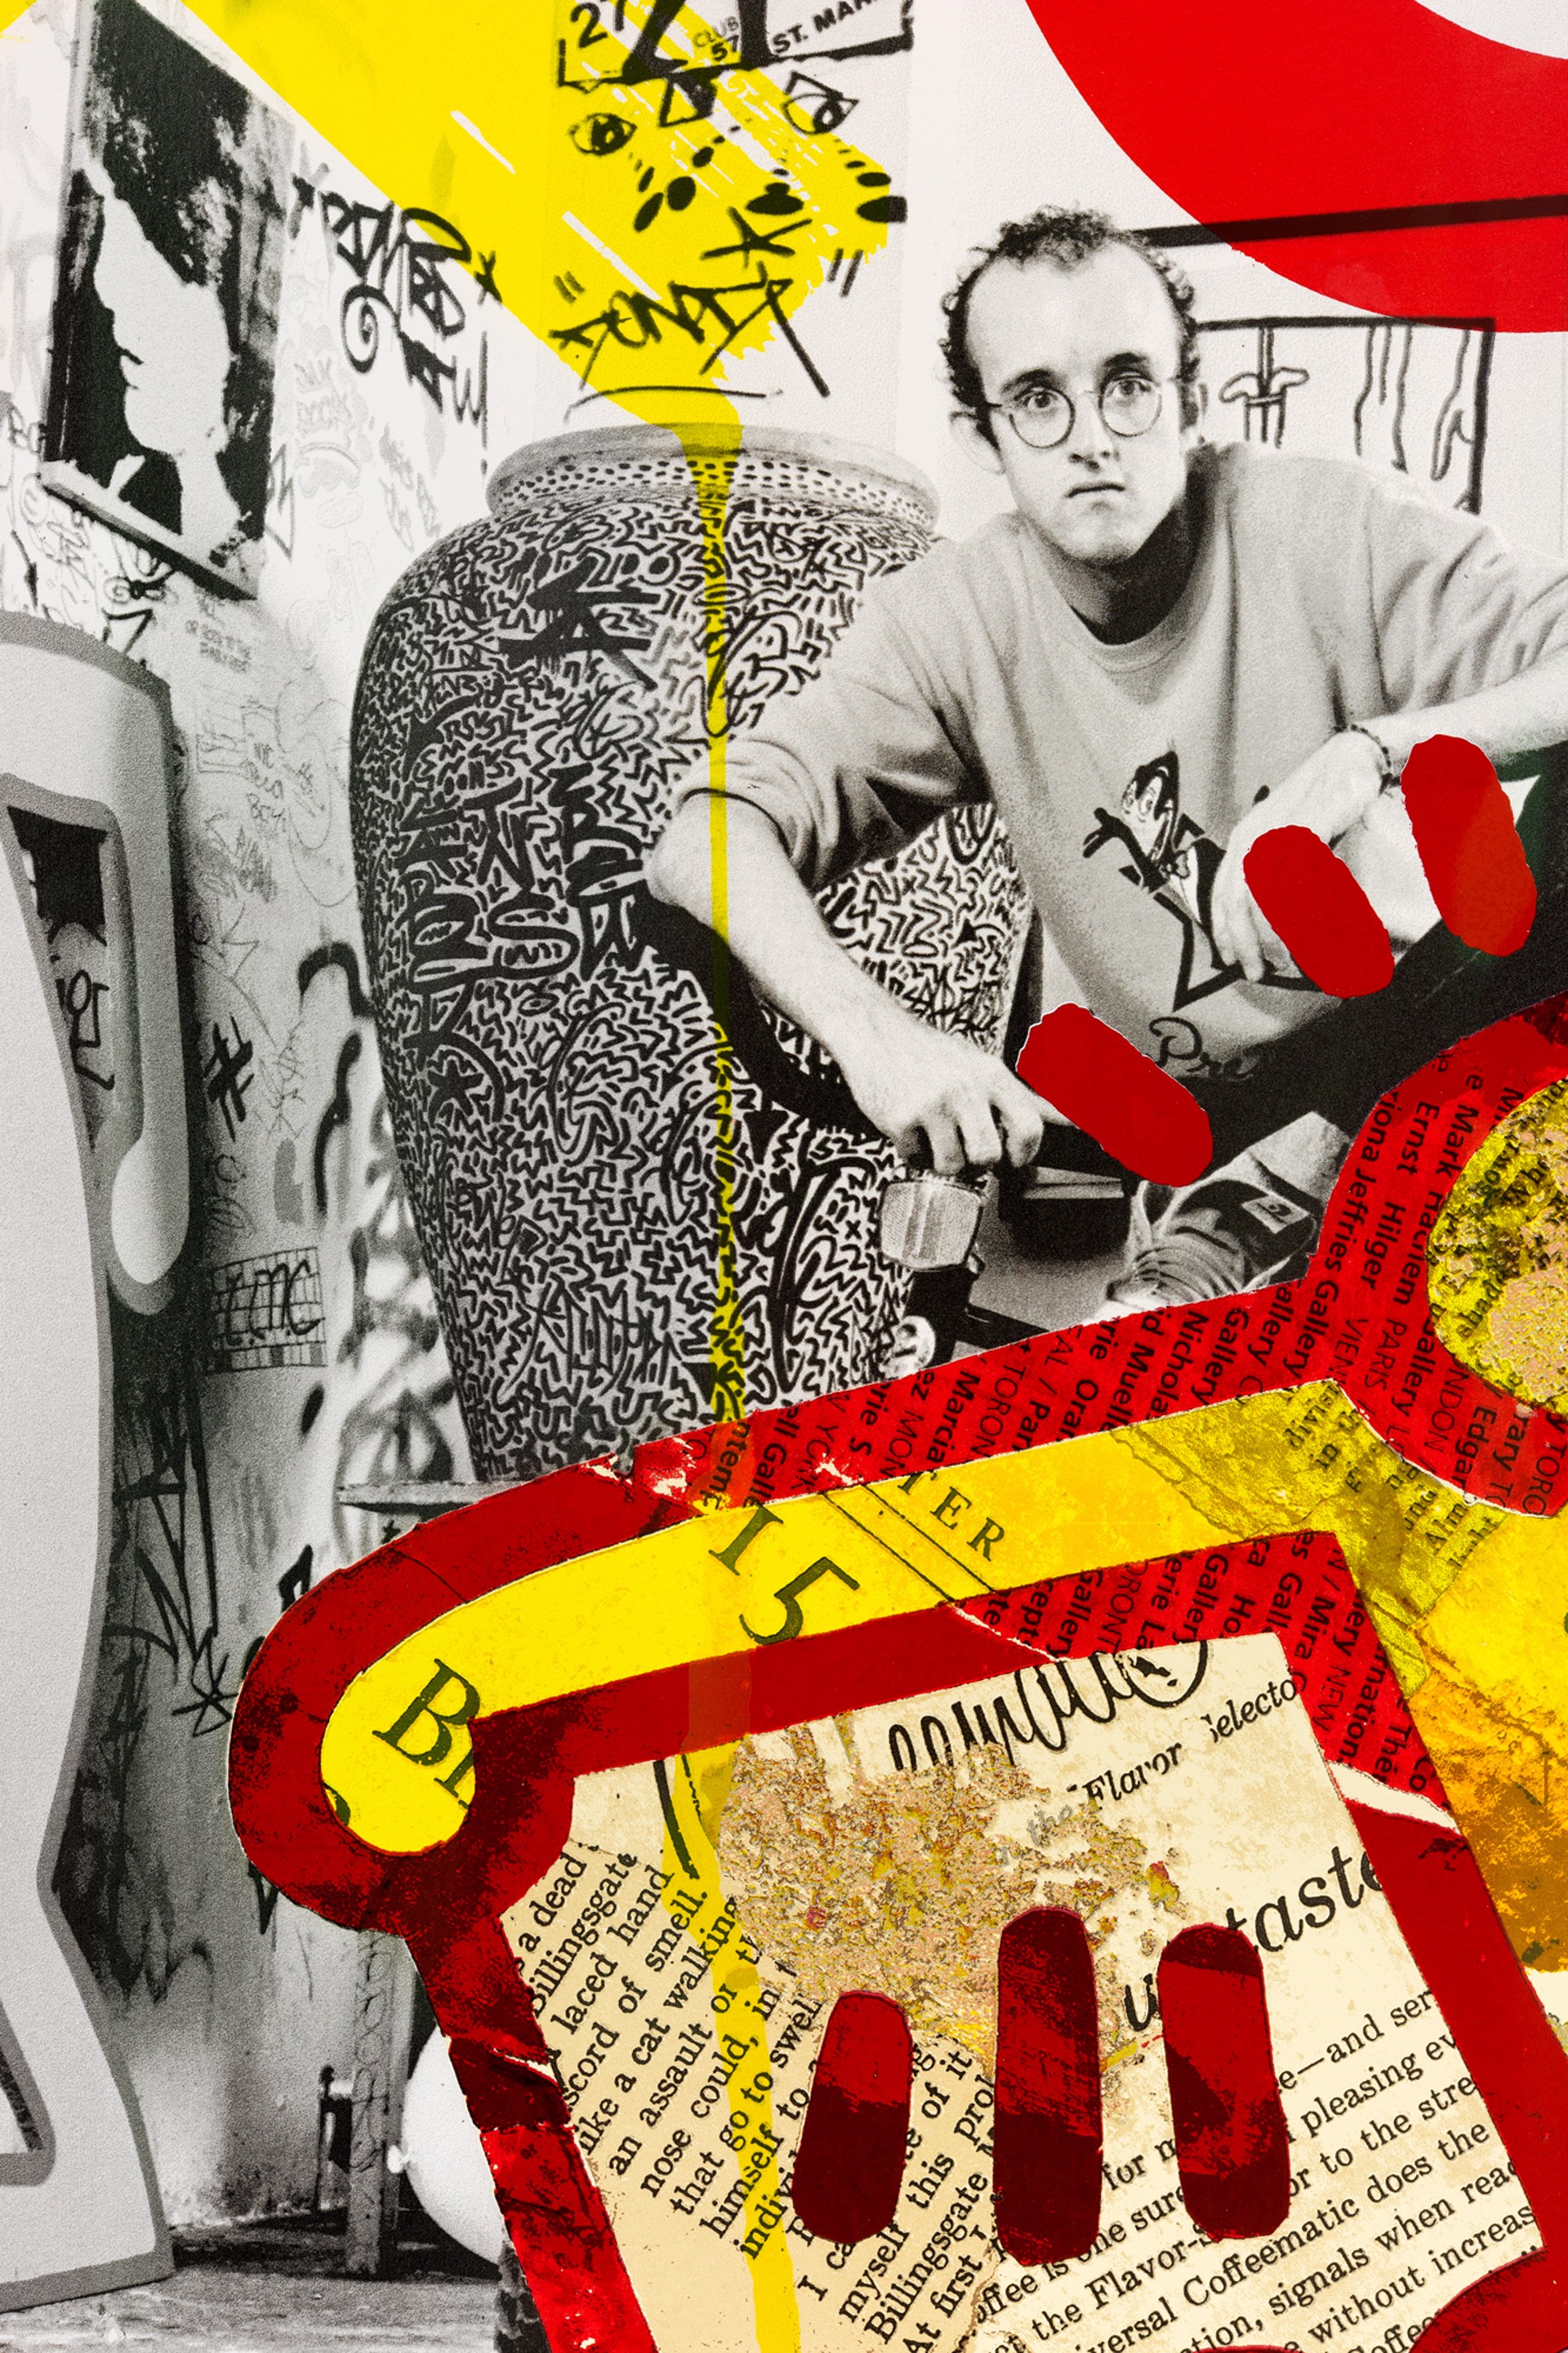 Keith Haring by Cey Adams X Janette Beckman